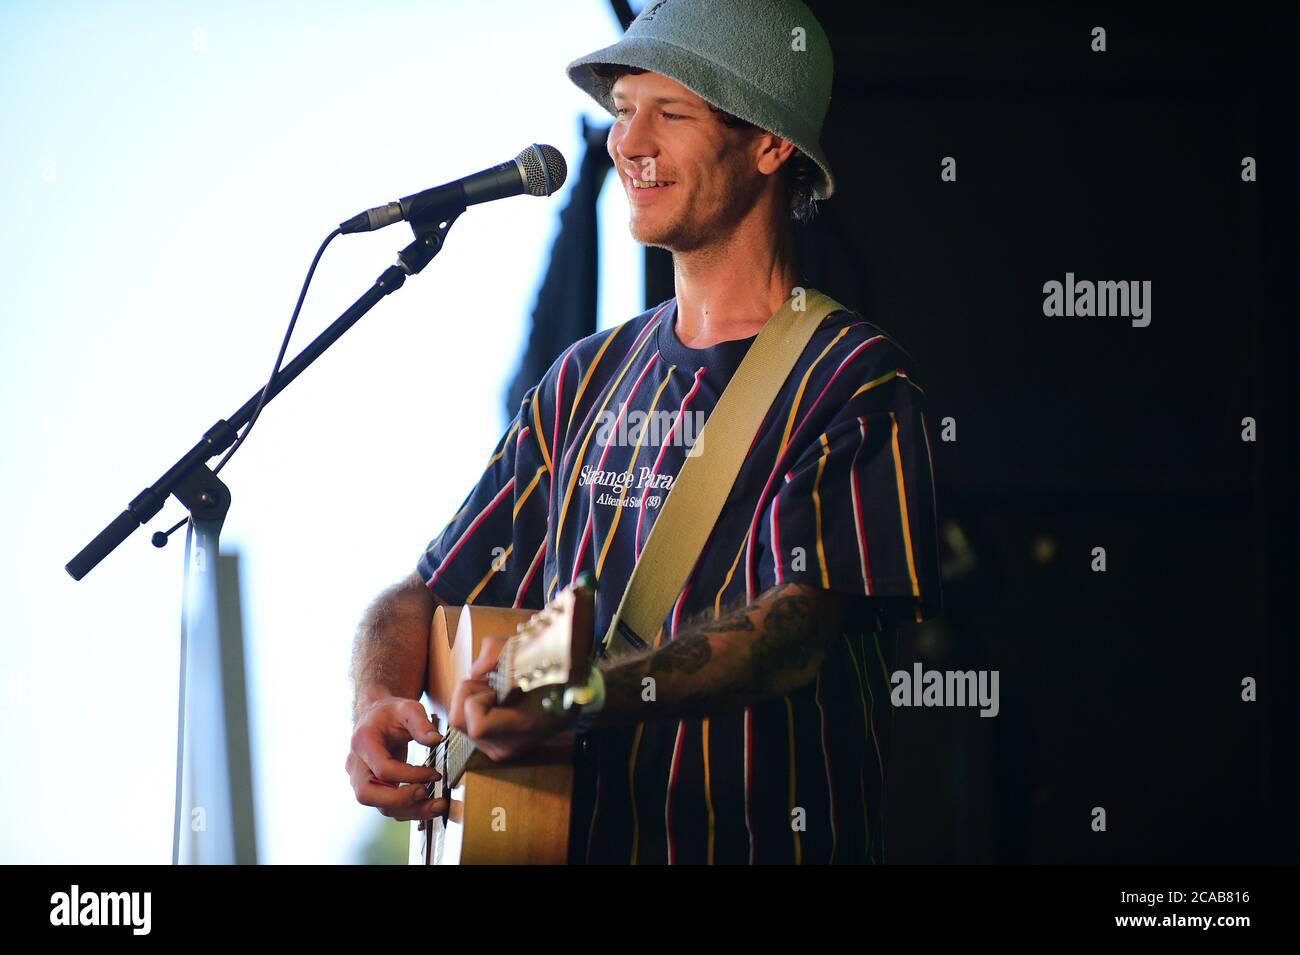 Zak Slater performing at 'The Source' fringe festival in the Benalla Botanical Gardens. 23rd March 2019 Stock Photo